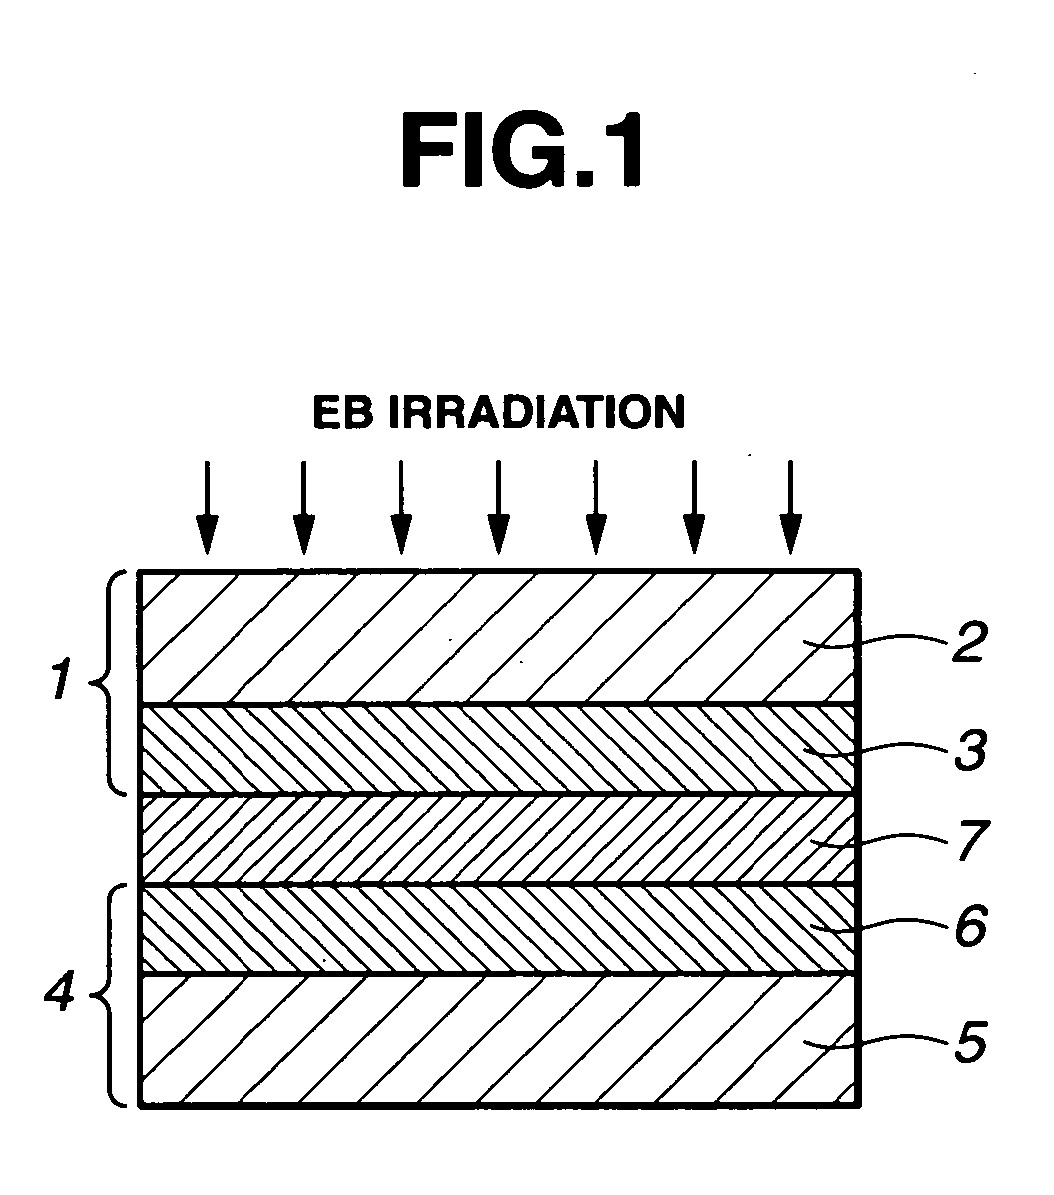 Electrolyte membrane-forming liquid curable resin composition, and preparation of electrolyte membrane and electrolyte membrane/electrode assembly